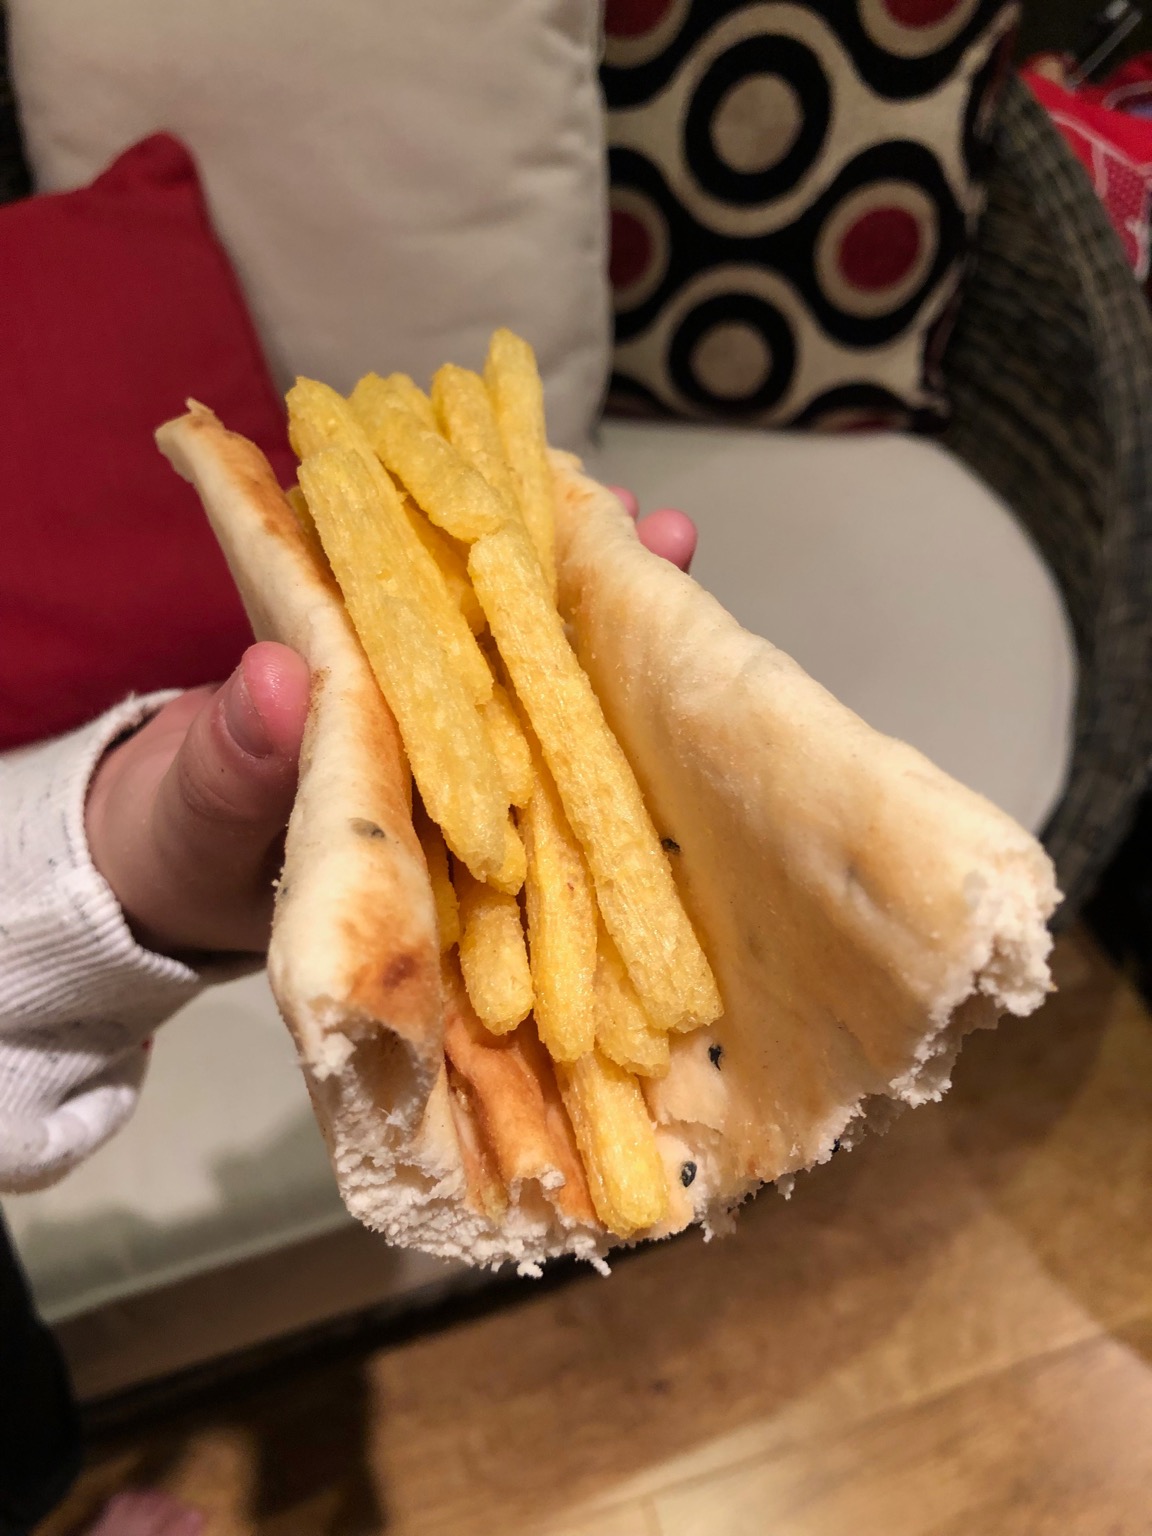 Chipsticks held in part of a naan bread